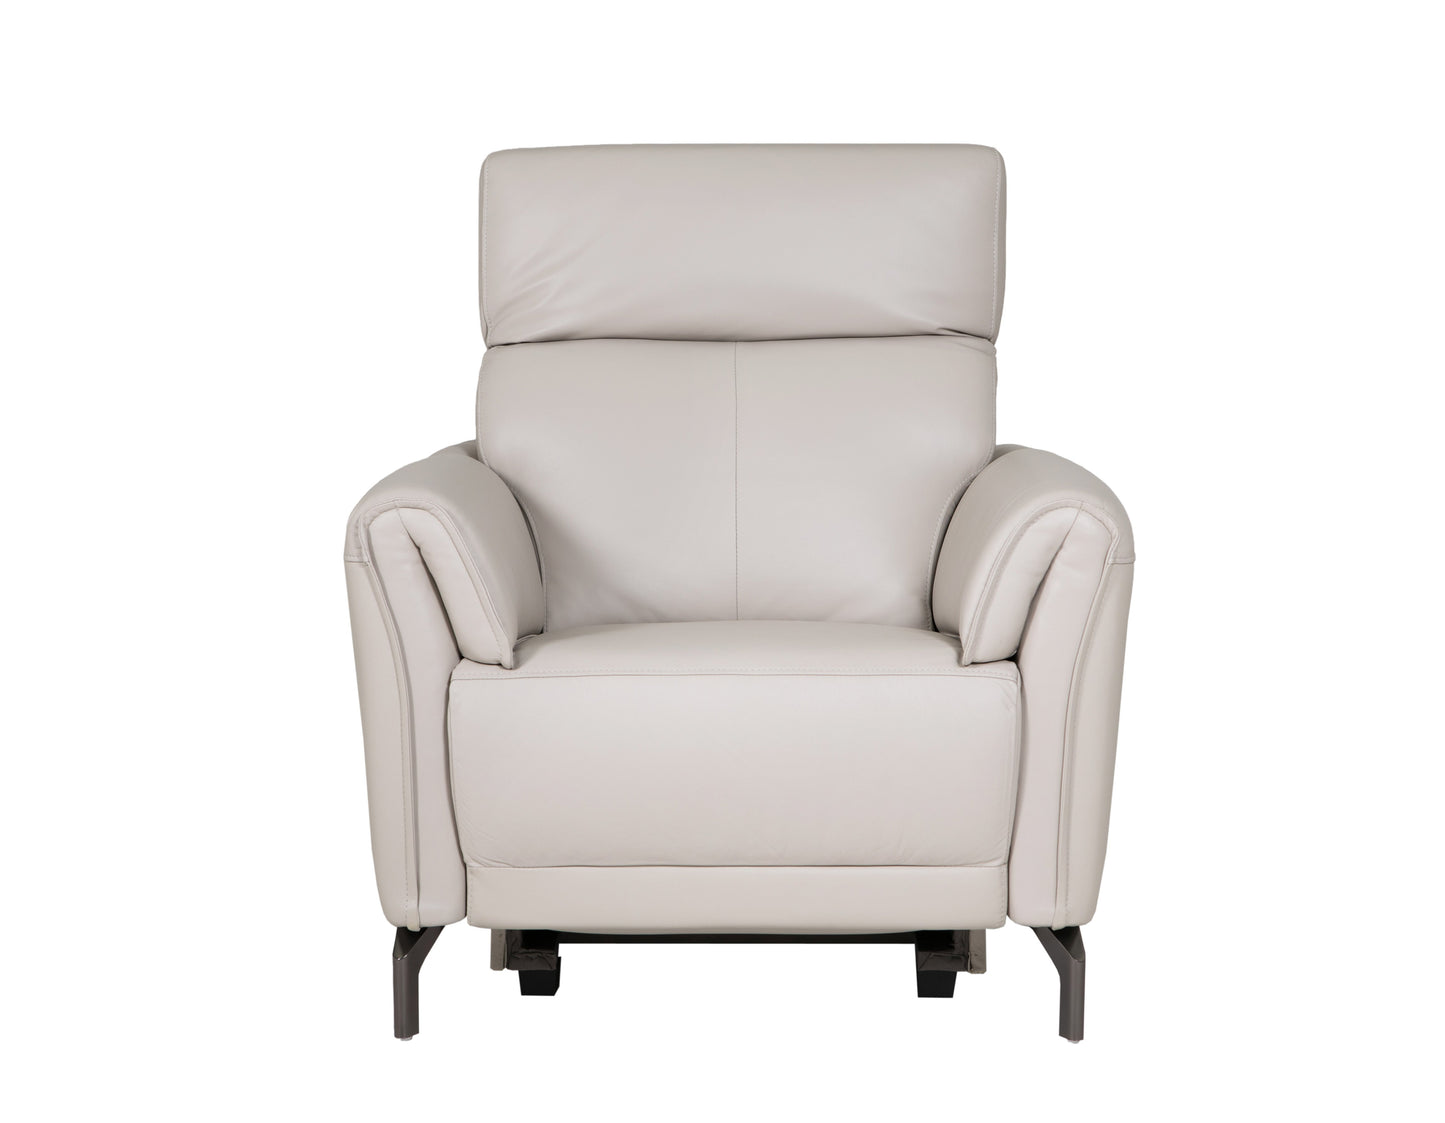 Naples 1 Seater - Cashmere 20% OFF